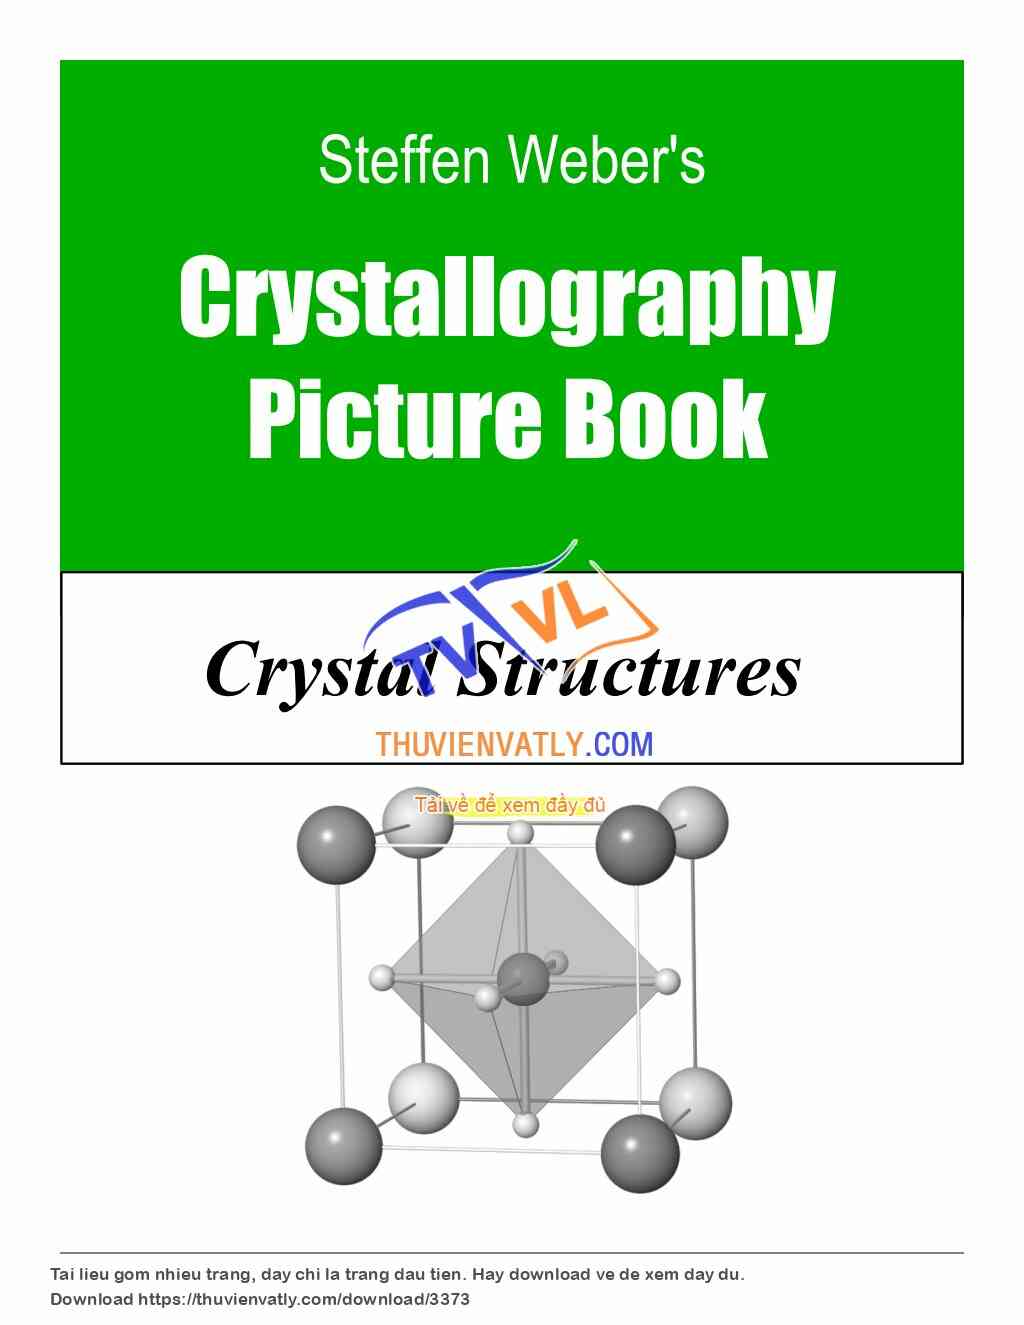 Crystal Structures